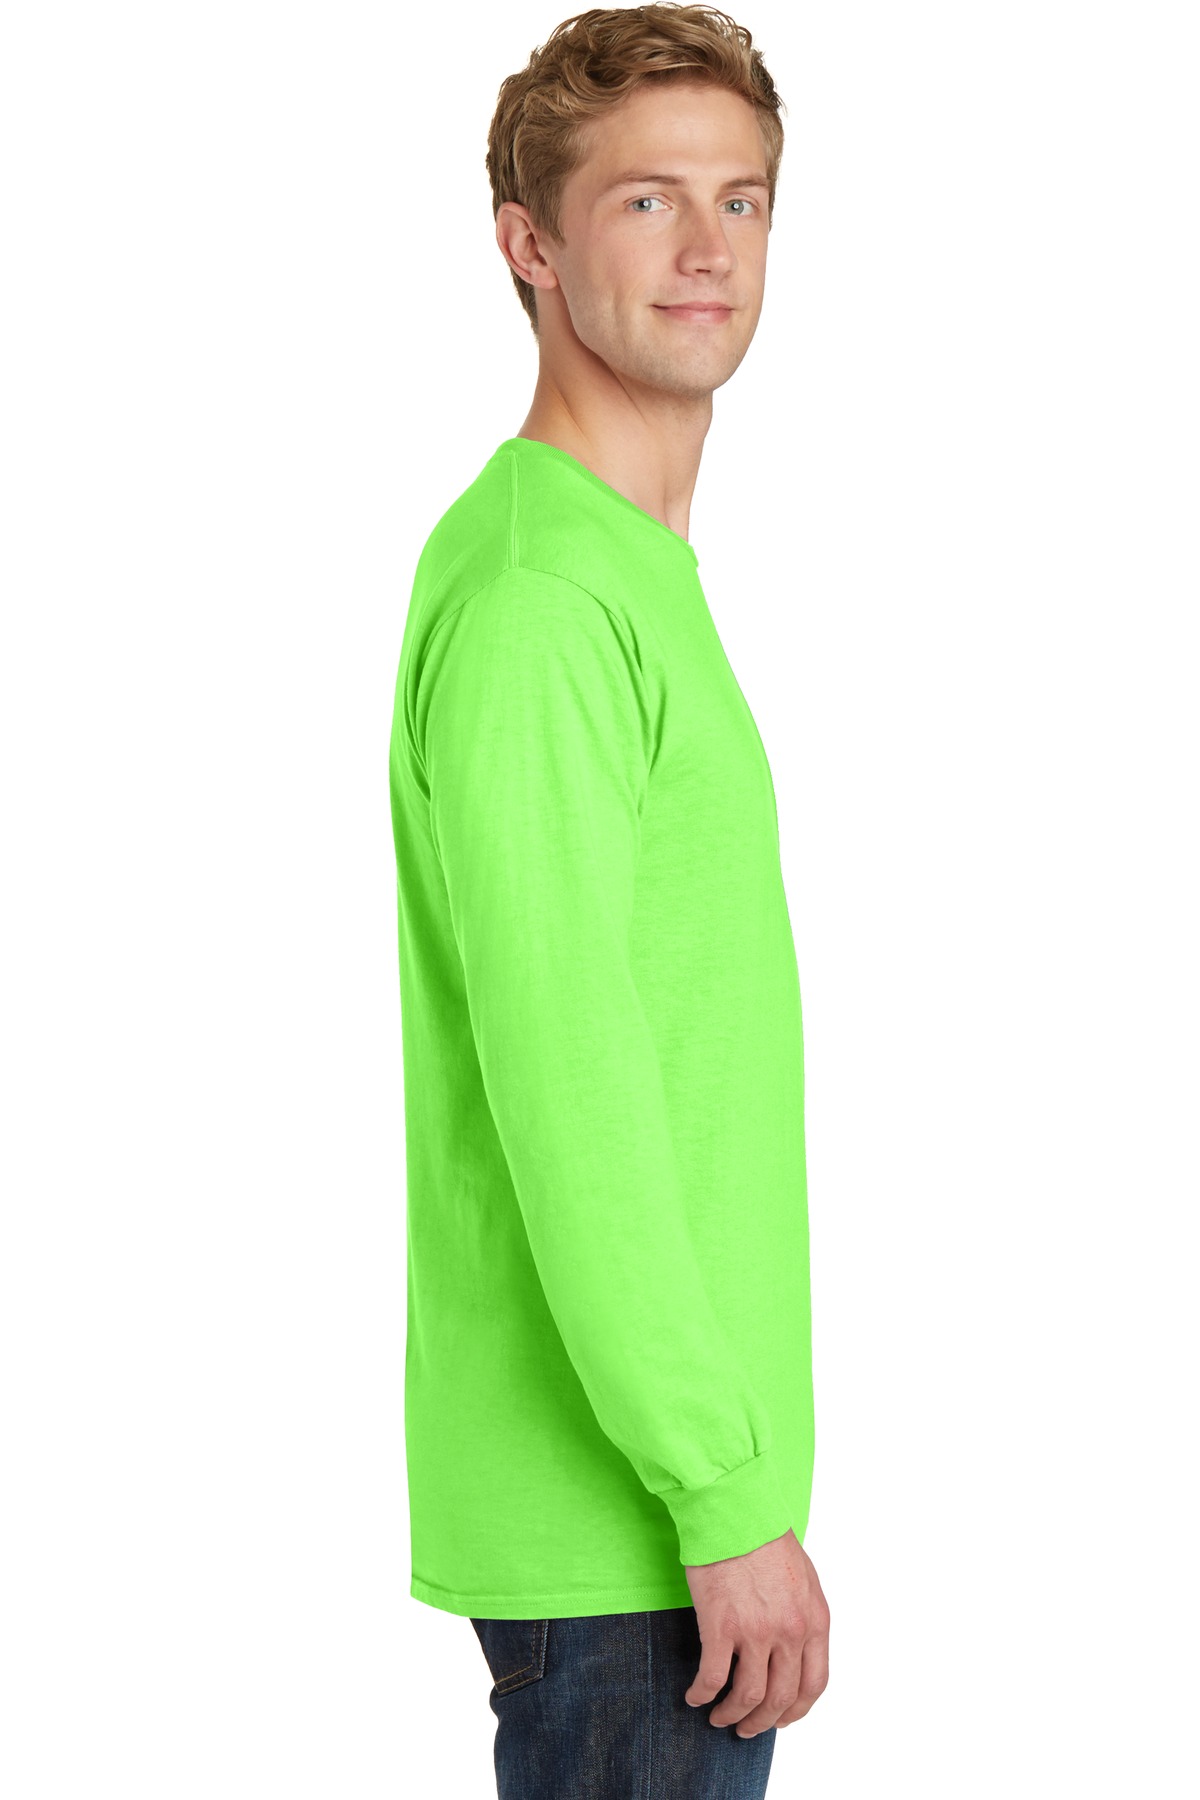 Port & Company Pigment Dyed Long Sleeve Tee-XL (Neon Green) - image 3 of 6